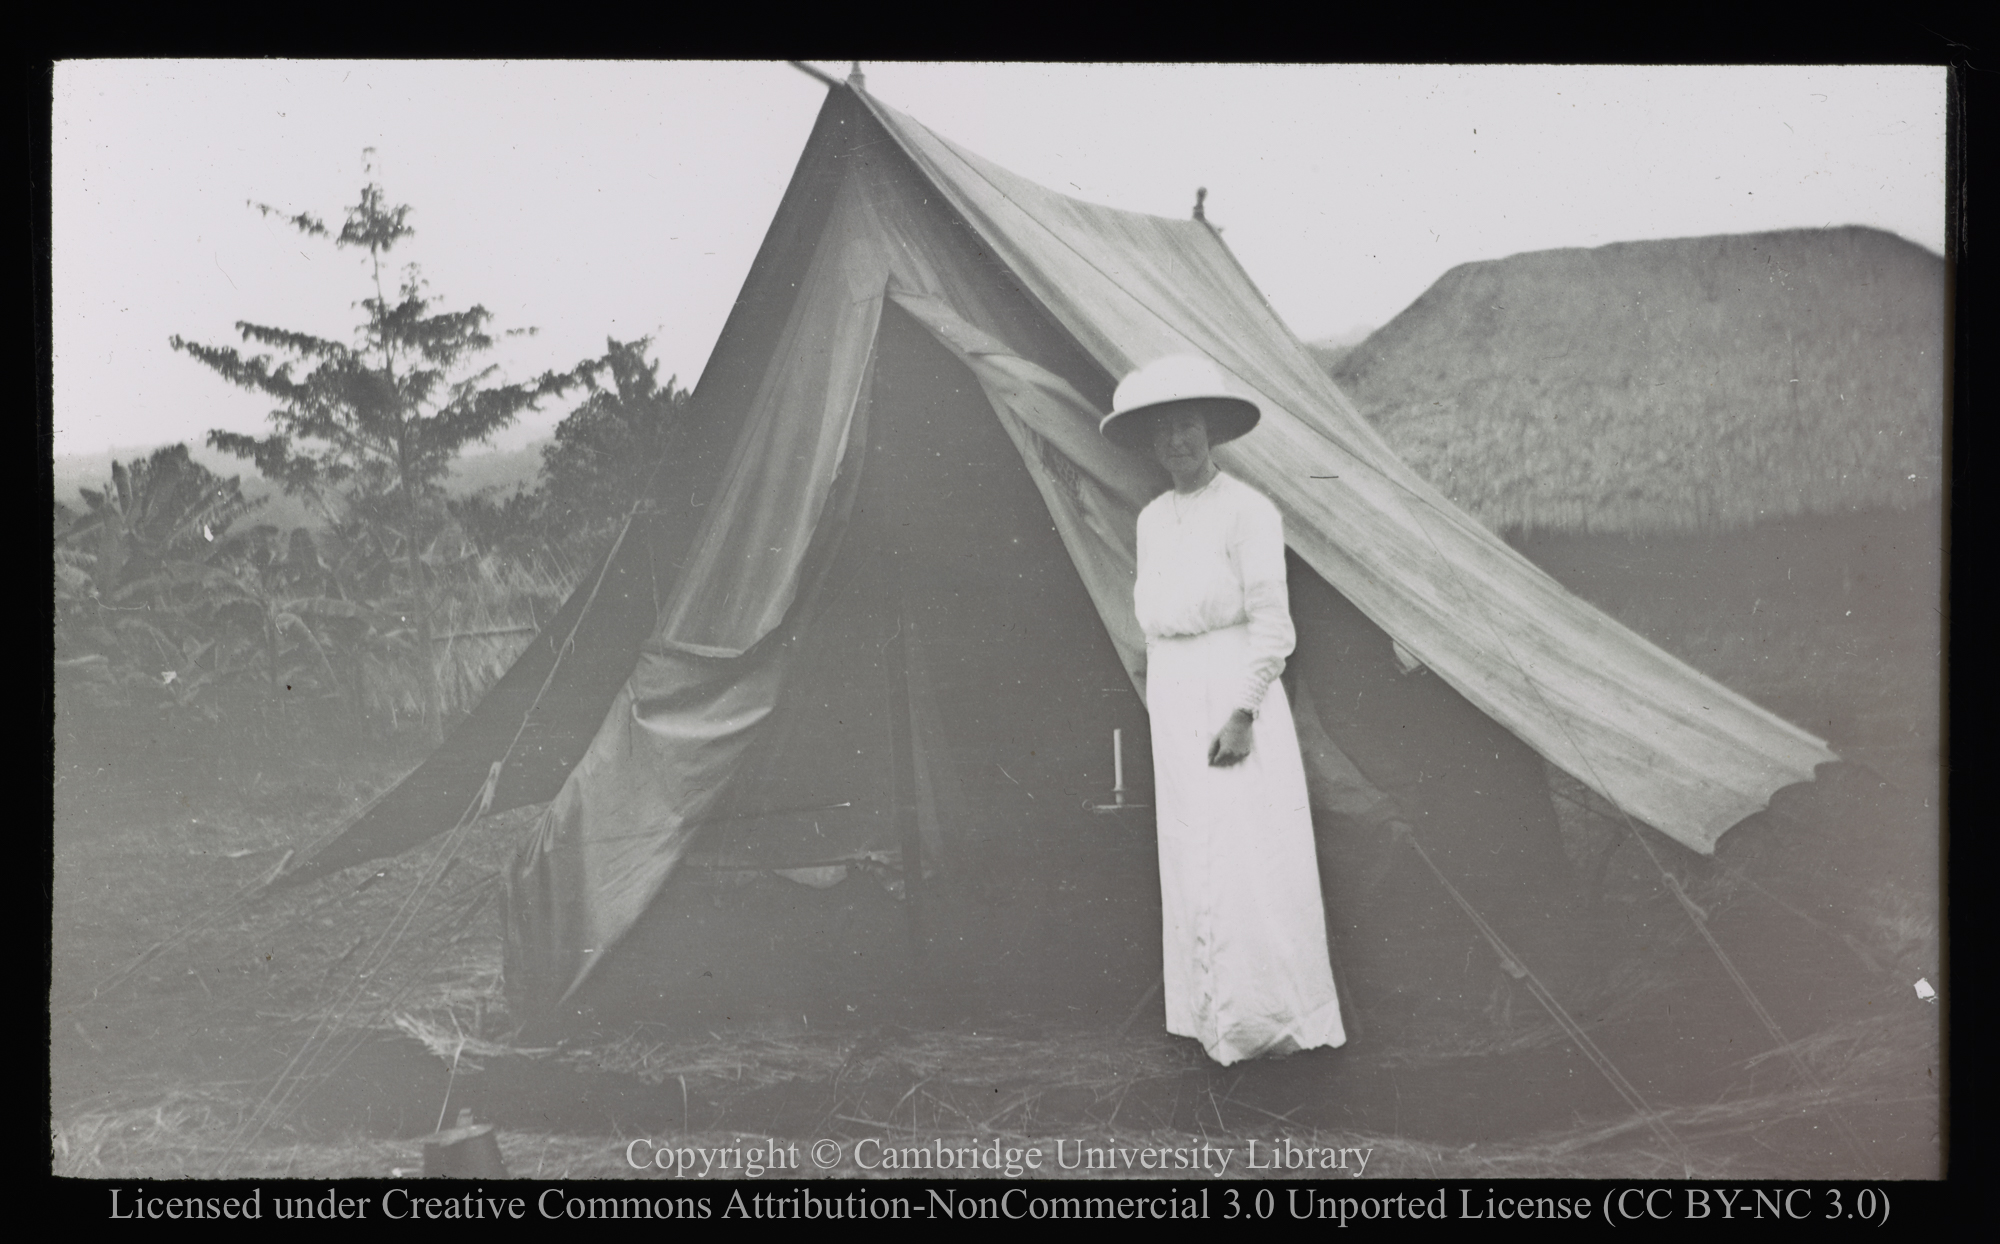 European woman standing by tent, 1905 - 1947